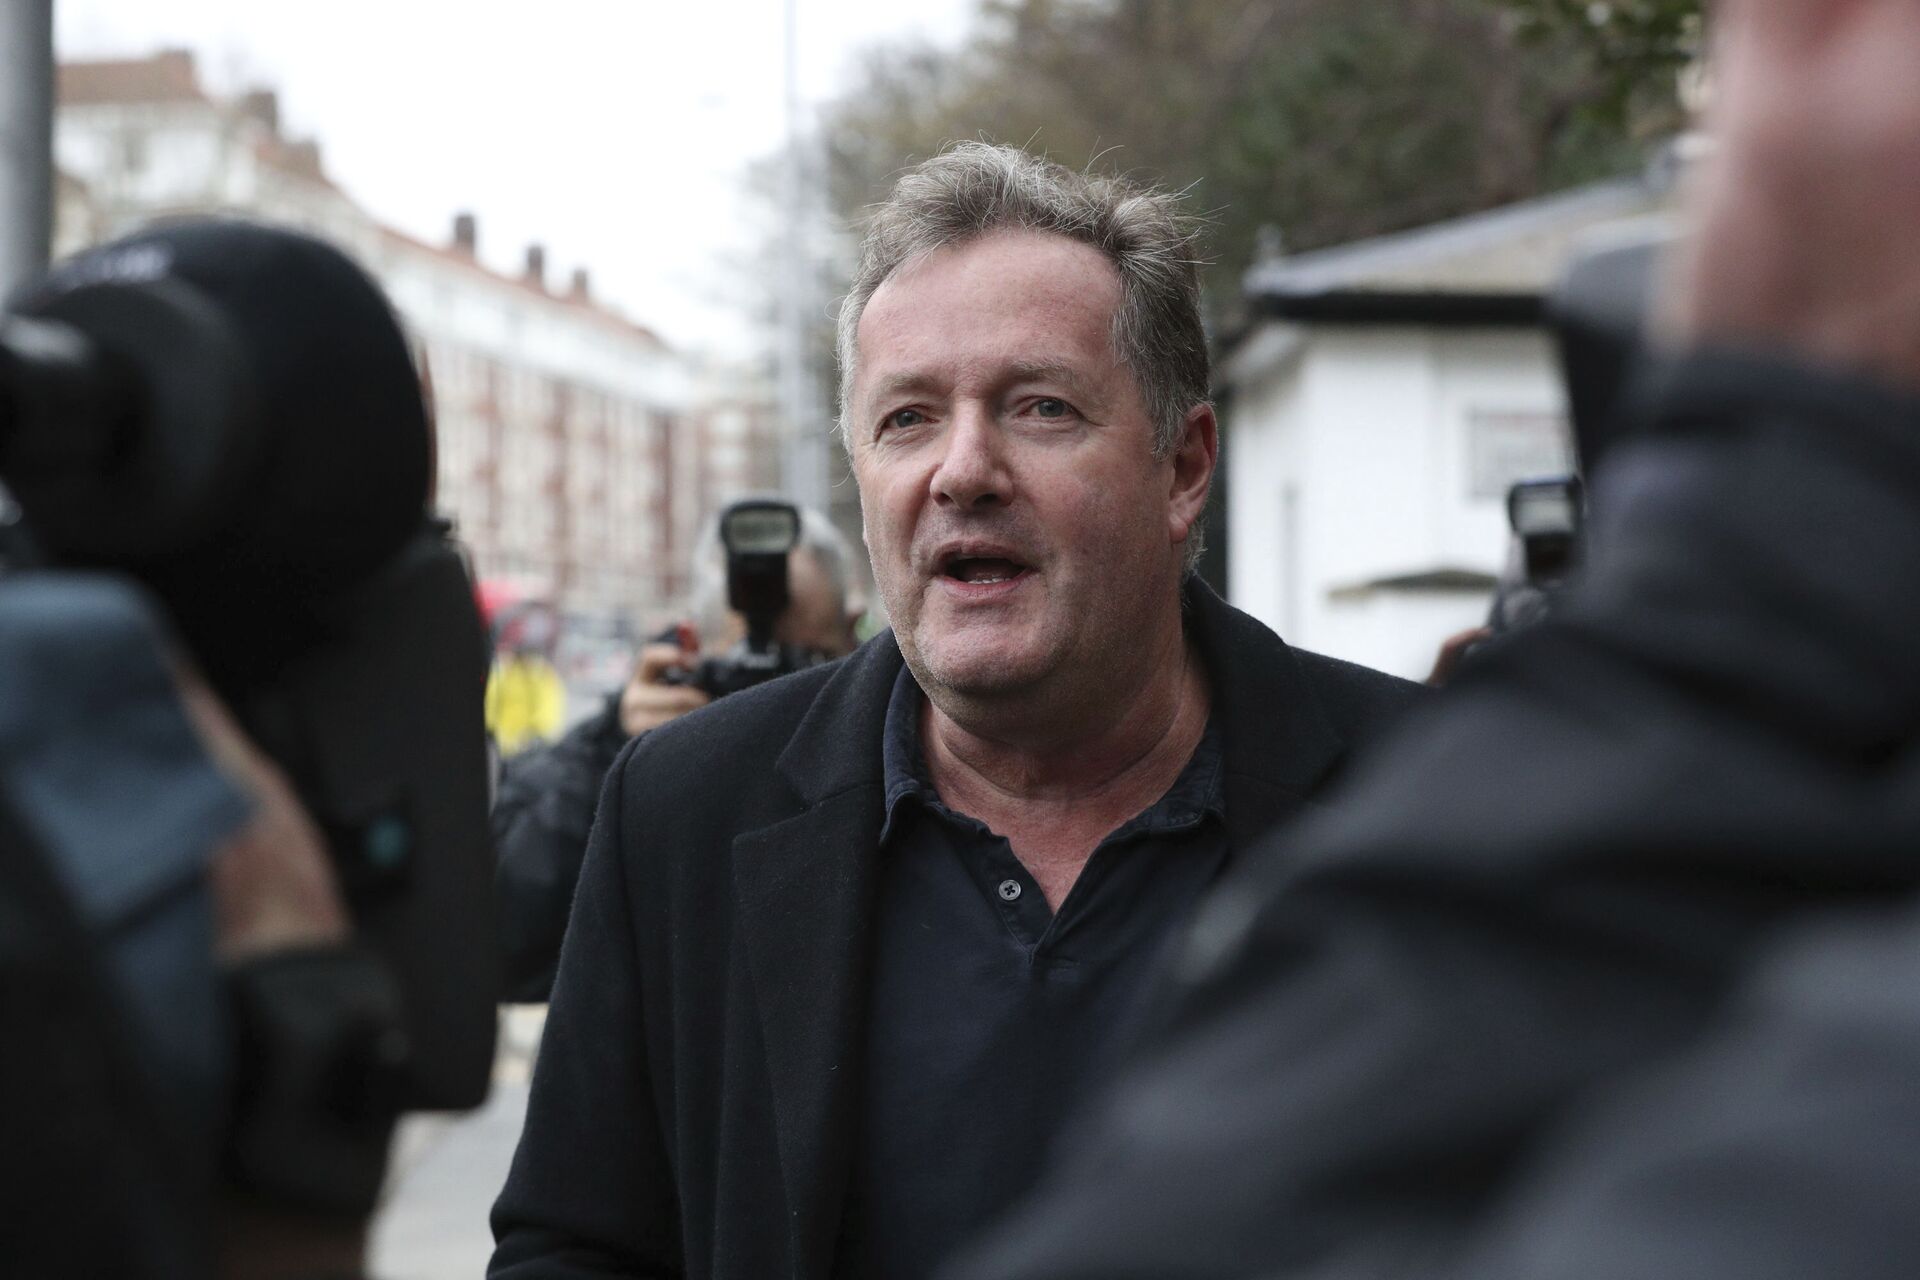 British television host Piers Morgan speaks to reporters outside his home in Kensington, central London, Wednesday March 10, 2021 - Sputnik International, 1920, 27.09.2021